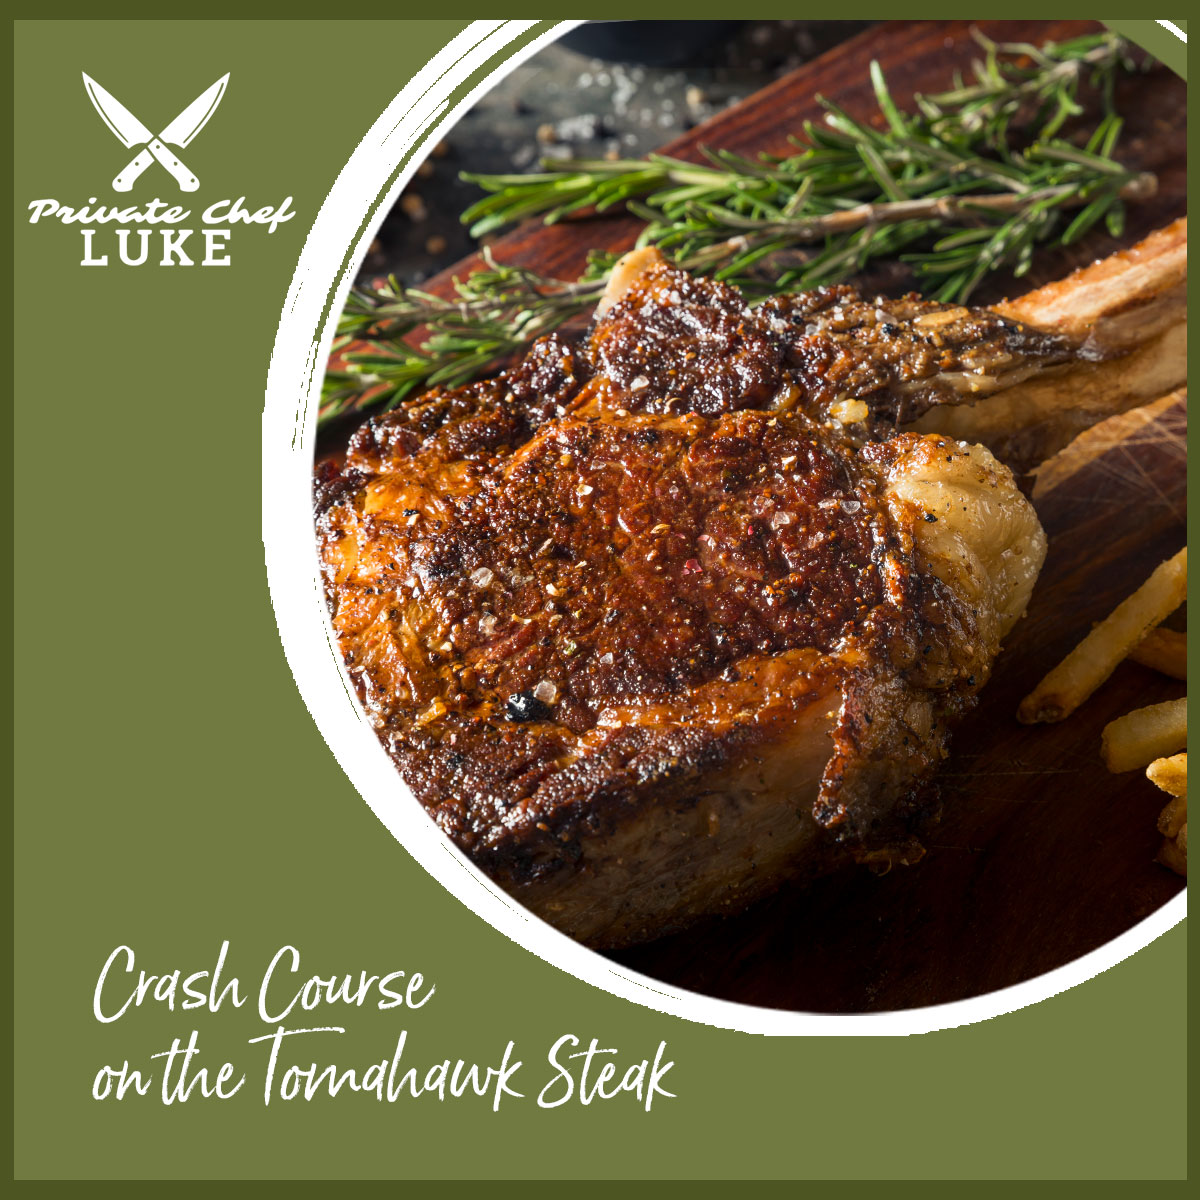 Download Chef Luke's recipe for the Crash Course on Tomahawk Steaks.